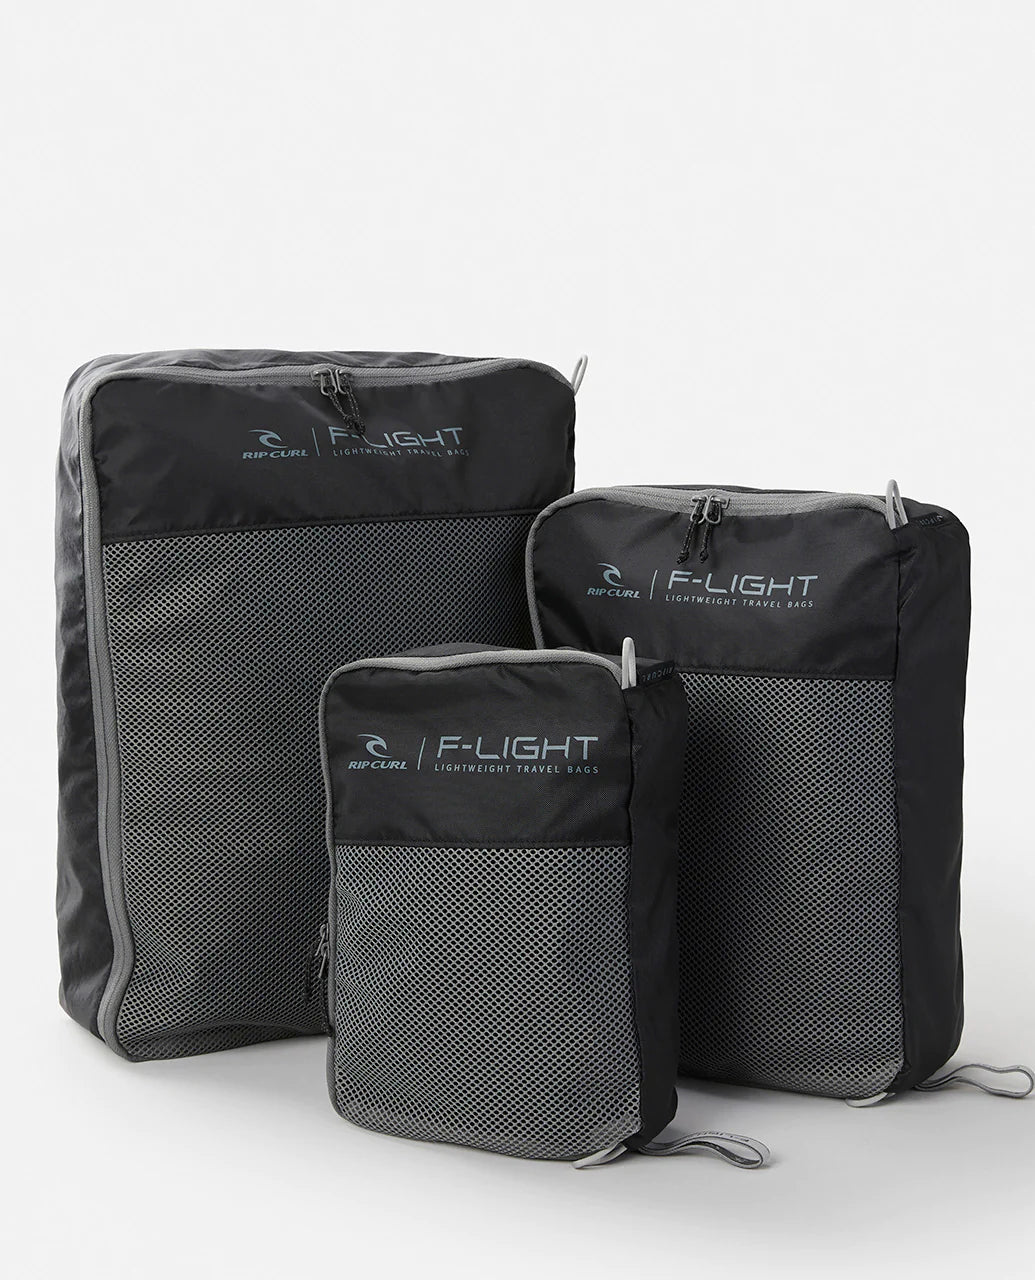 F-Light Packing Cell Organizer 3 Pack - Midnight